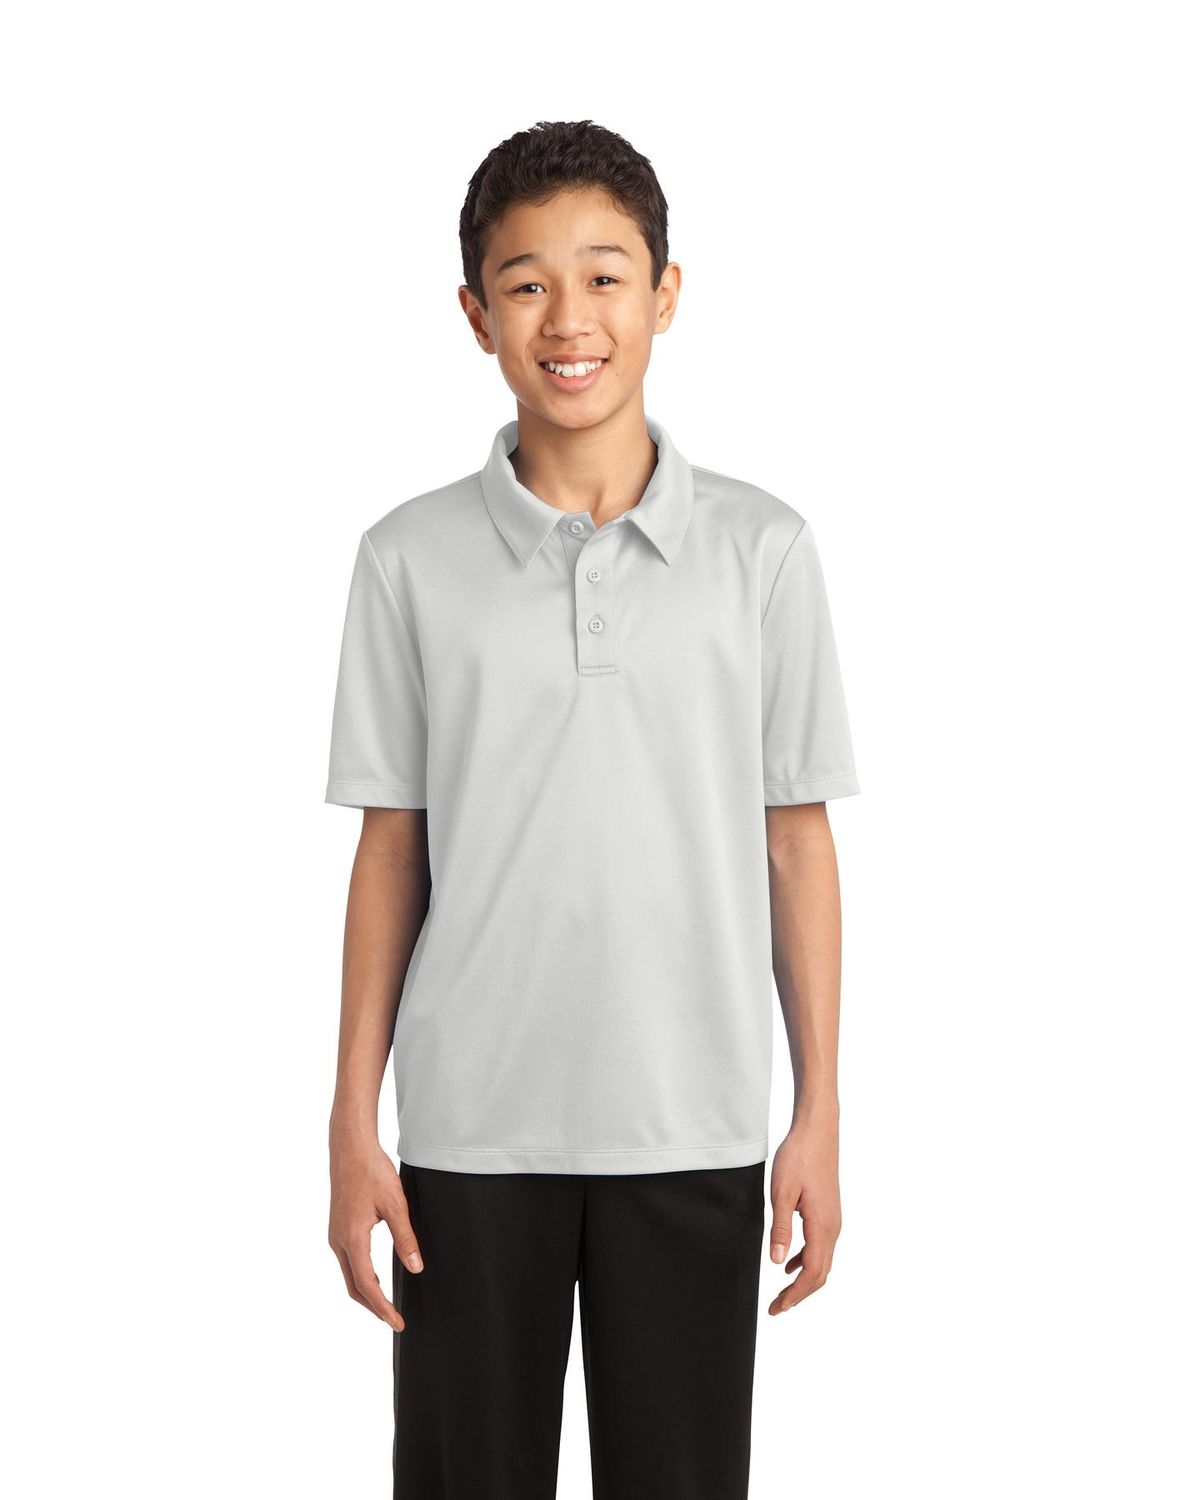 'Port Authority Y540 Youth Silk Touch Performance Polo Shirt'